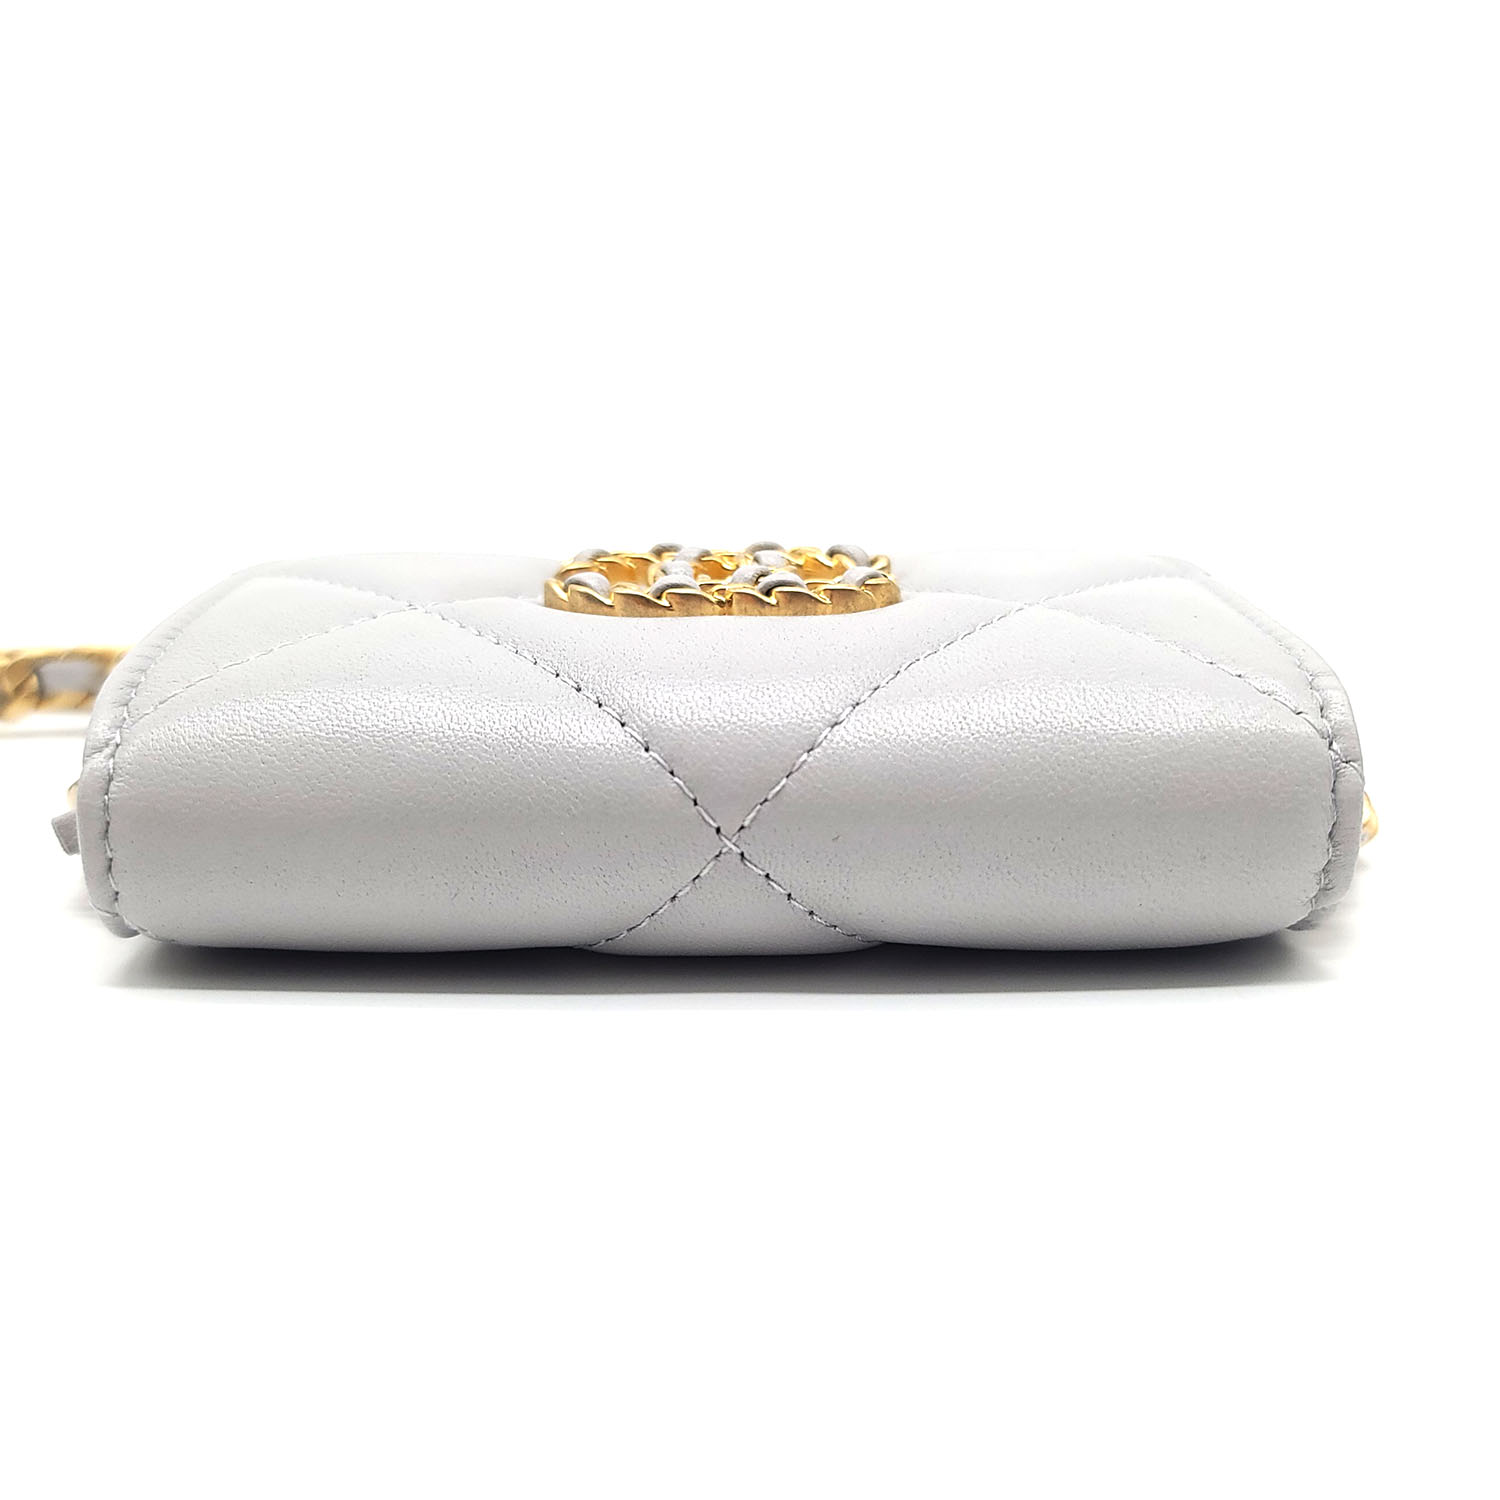 Chanel #Chanel19 Flap Coin Purse With Chain - BAGAHOLICBOY